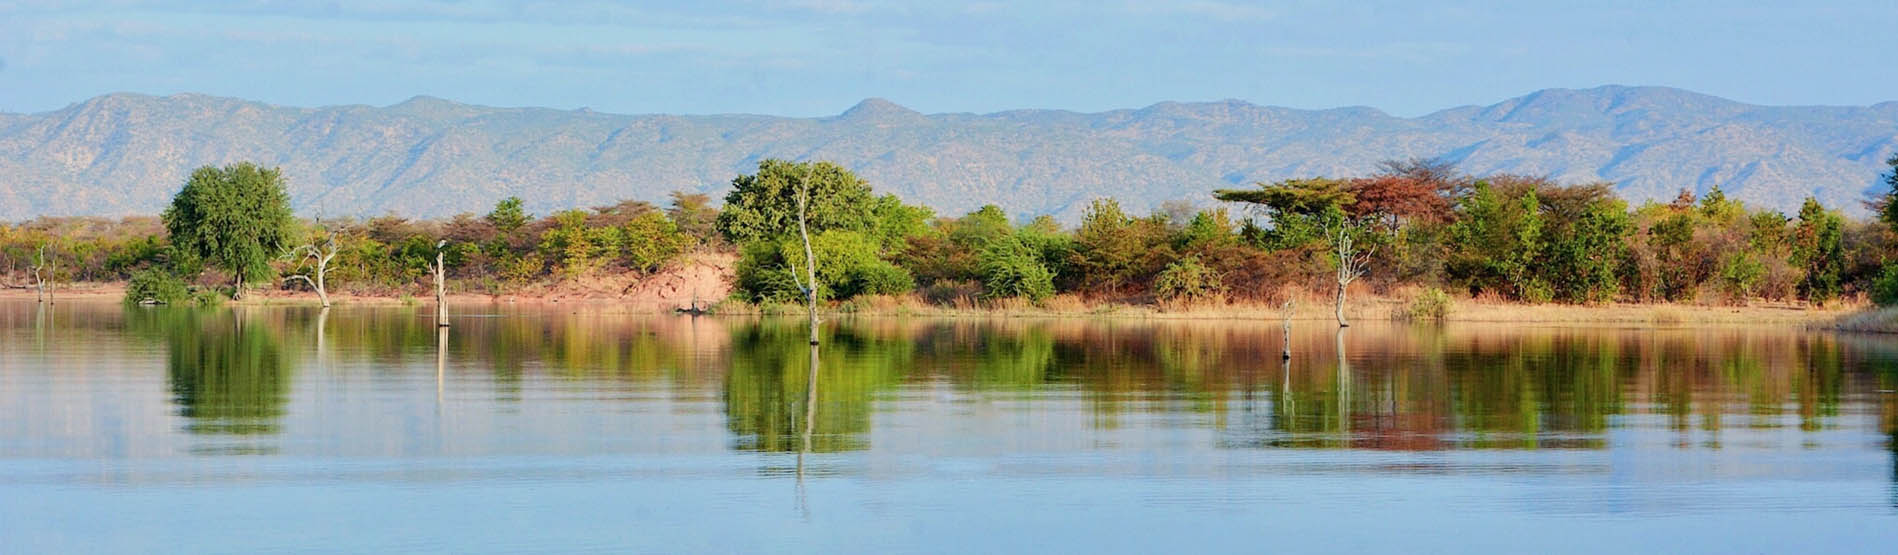 Image of the lake in Zambia